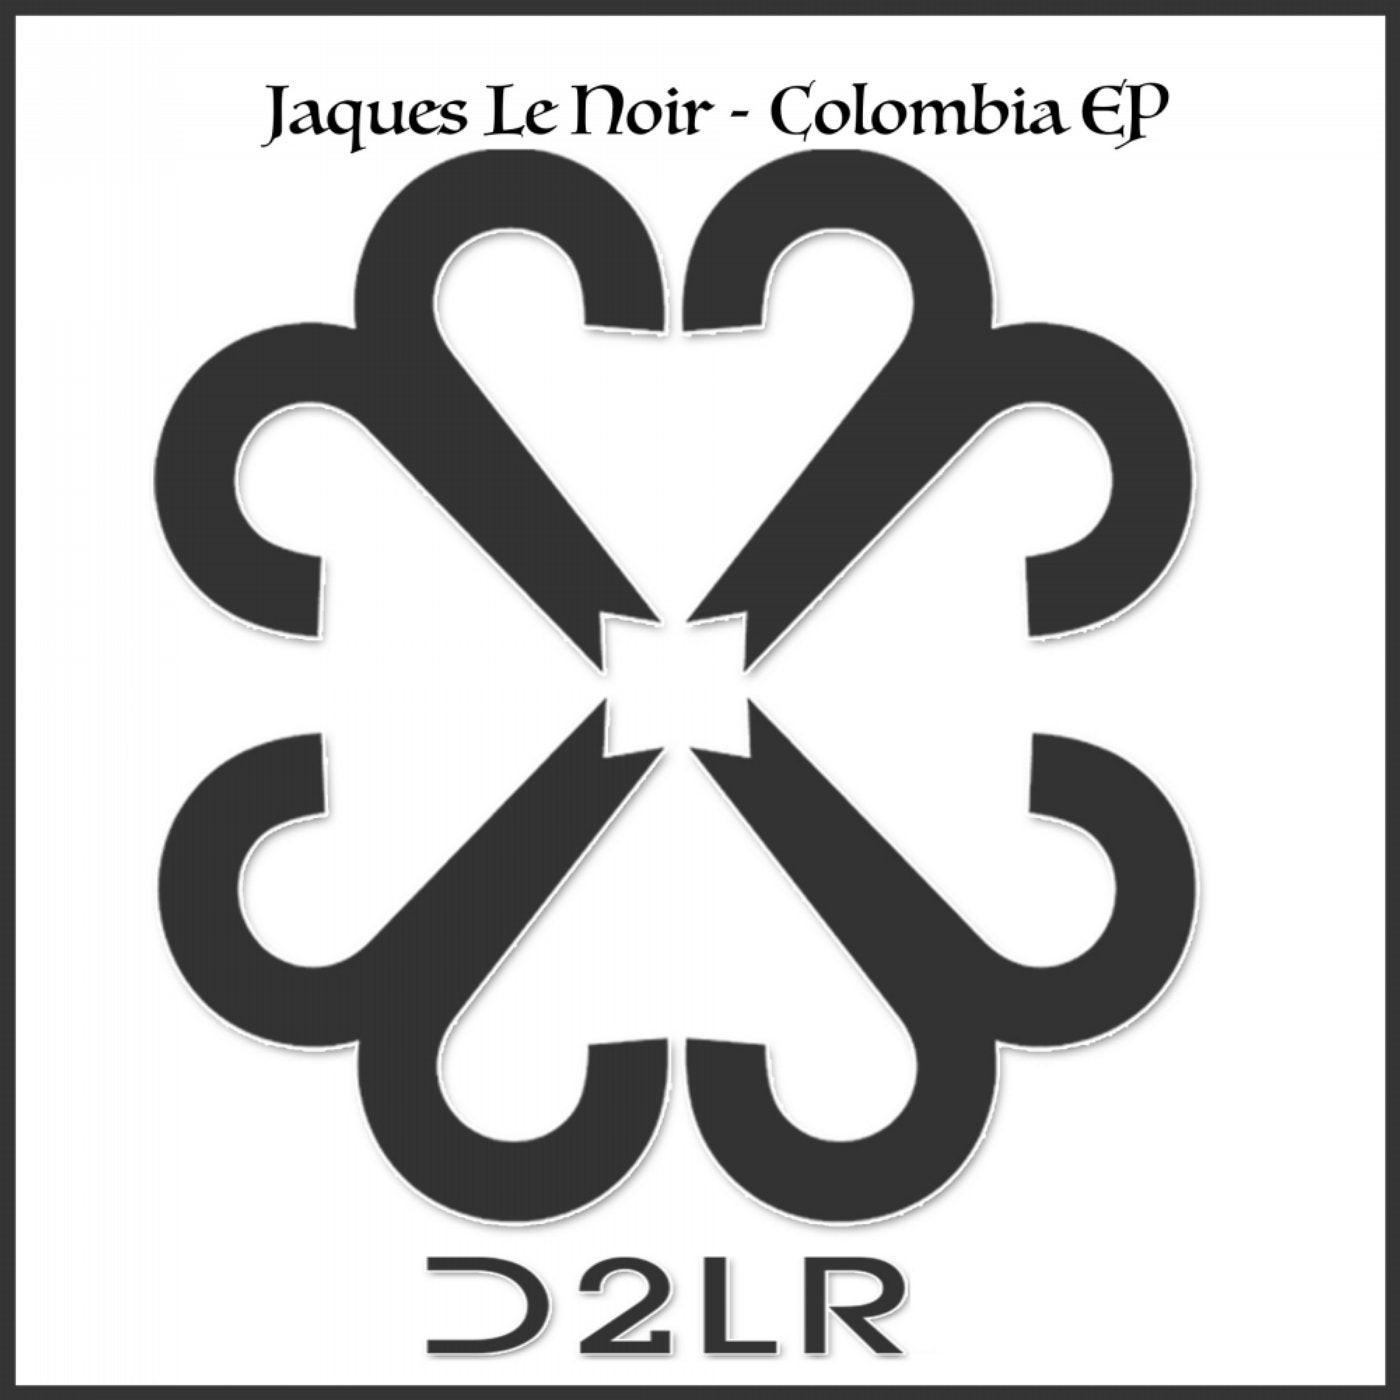 Colombia EP